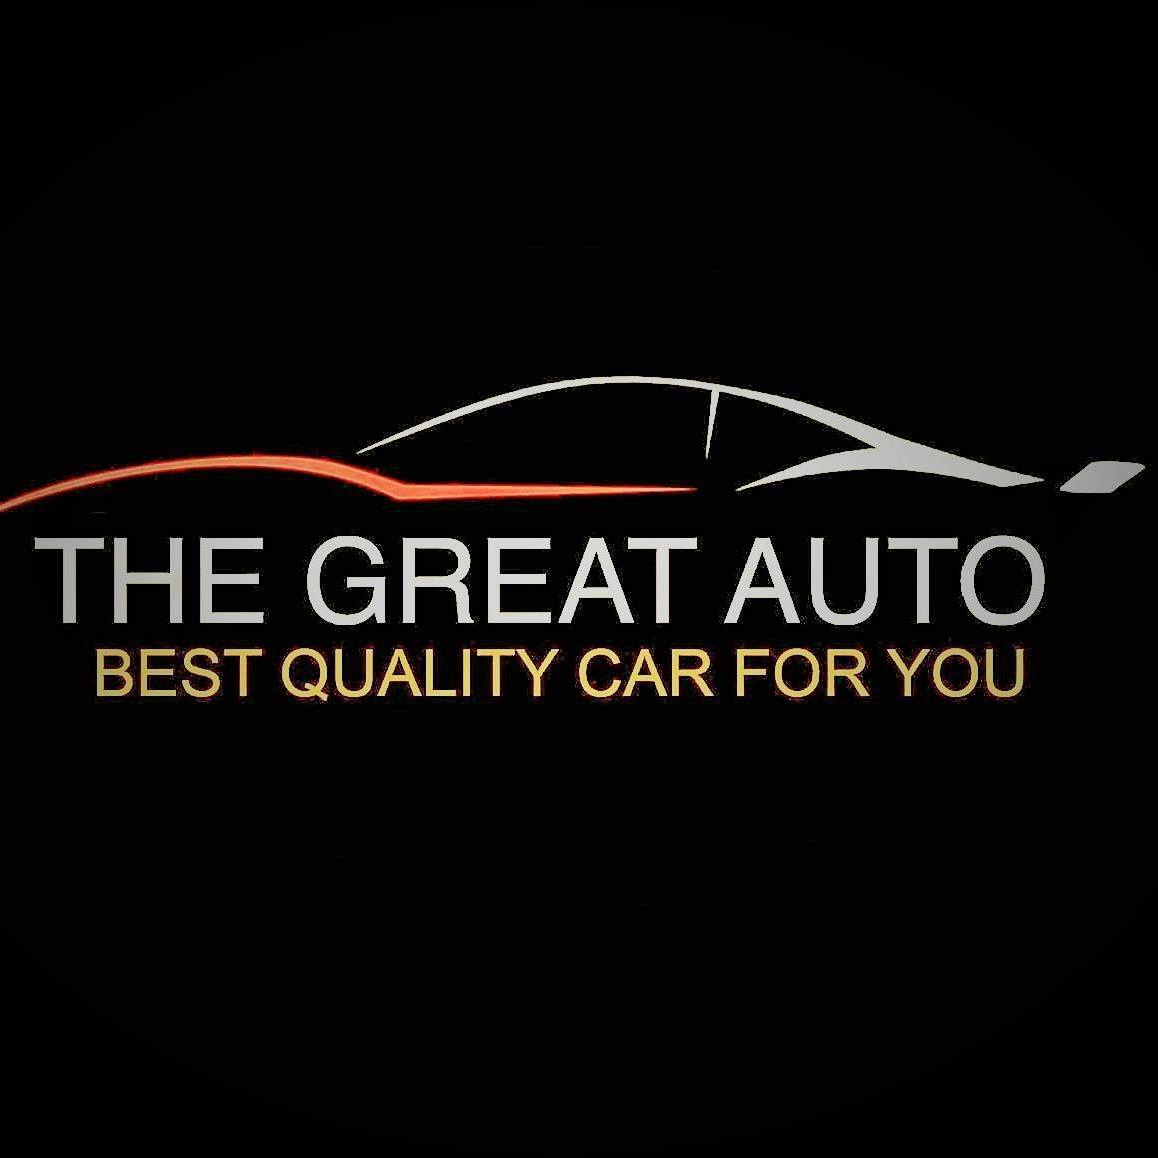 The Great Auto